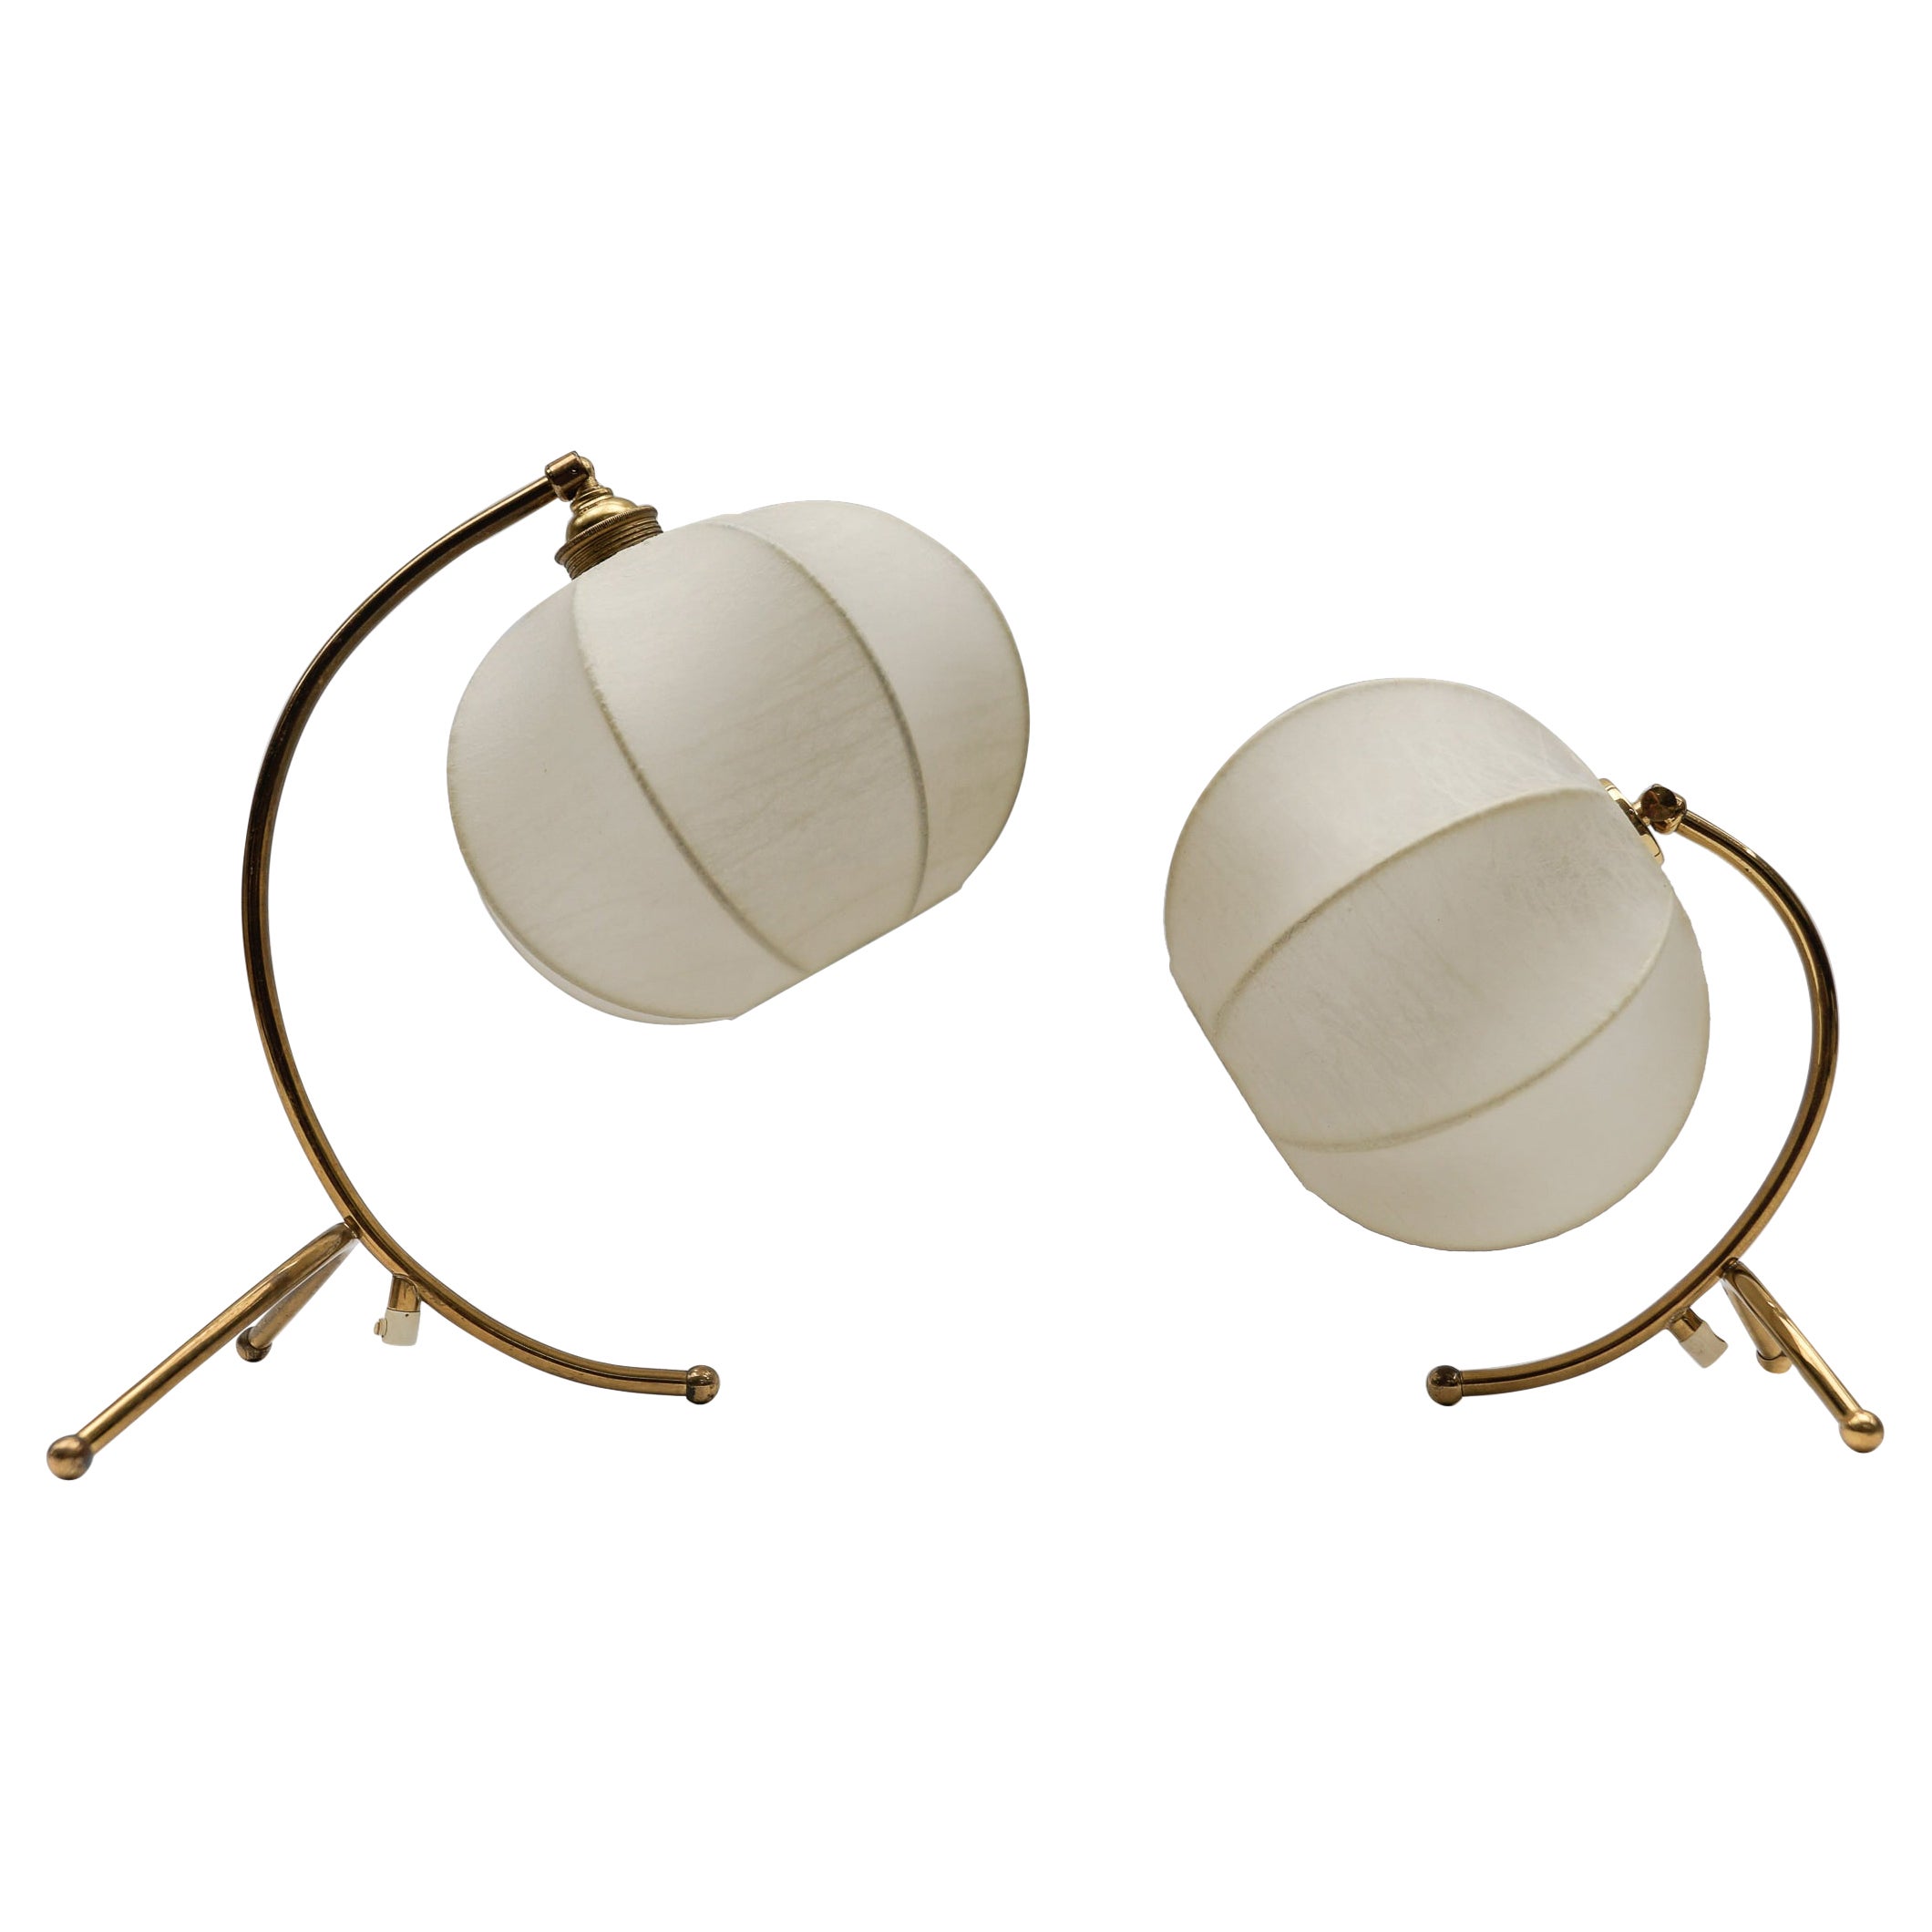 Pair of Mid-Century Modern Brass and Cocoon Tripod Table Lamps, 1950s